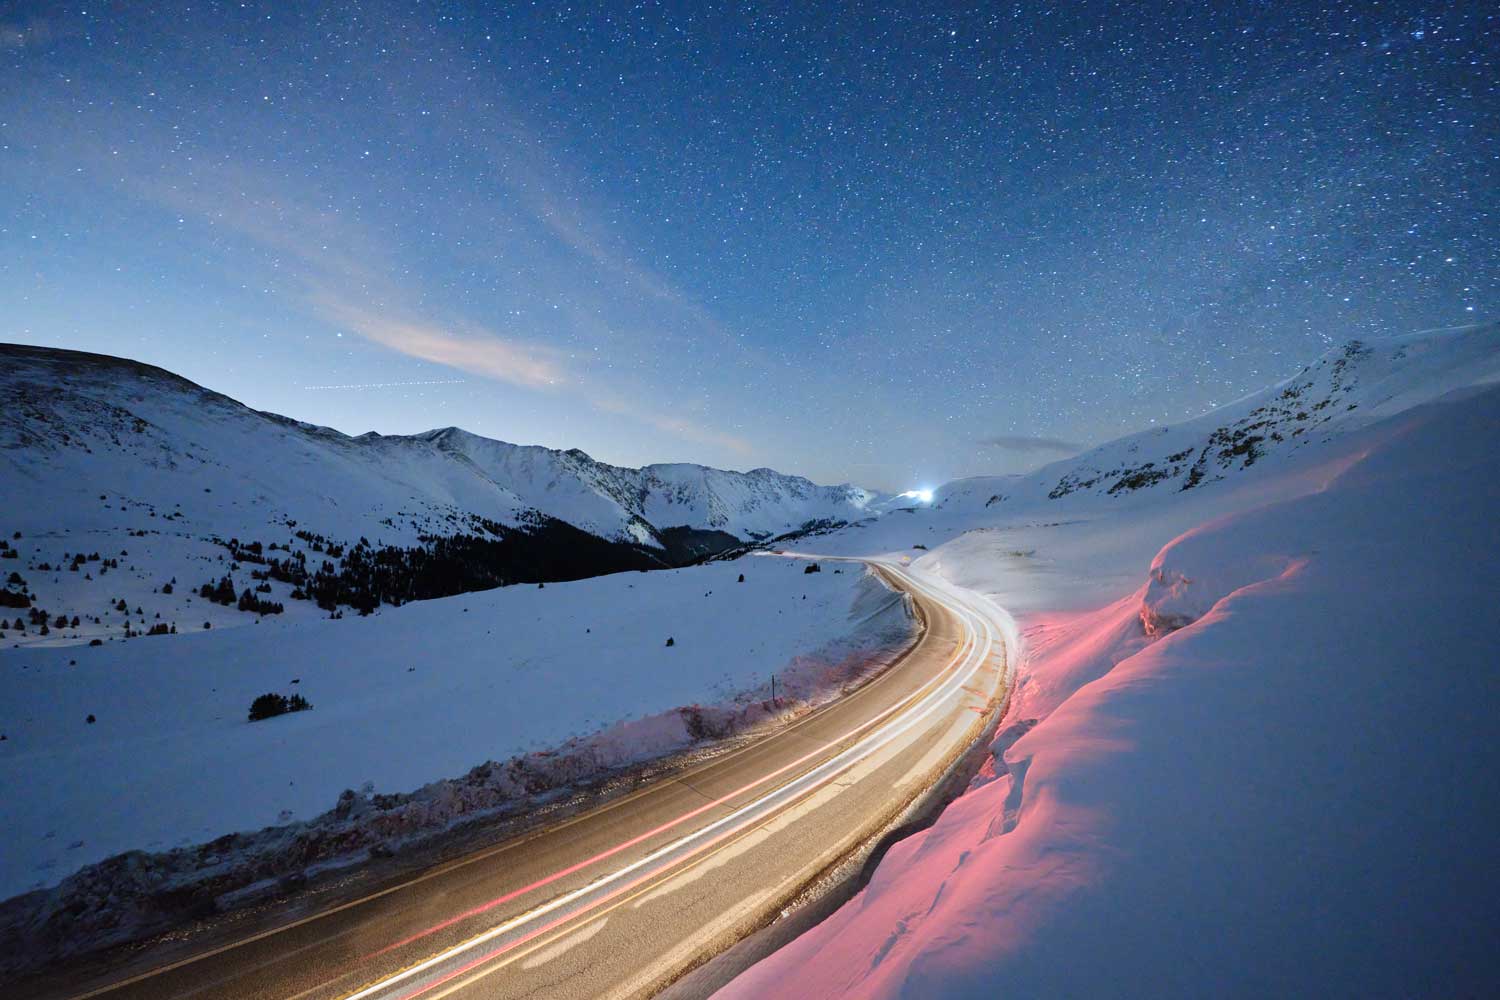 Astrophotography image of snowy valley at night below starry sky, with traffic trails winding along road in foreground and into the distance.